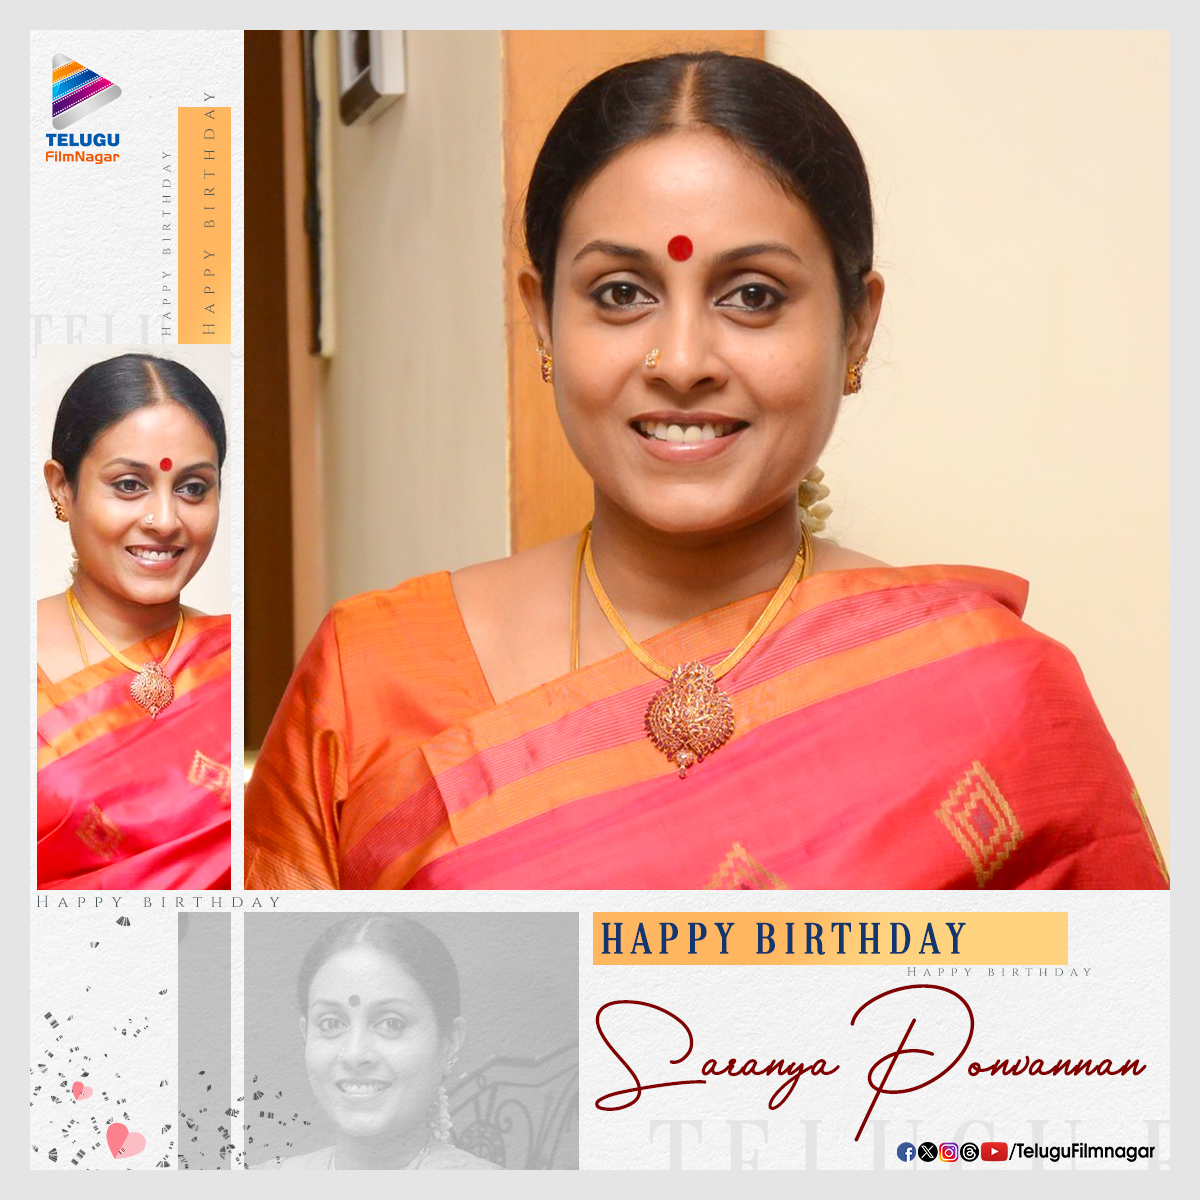 Sending warm birthday wishes to the immensely talented actress #SaranyaPonvannan! 🎉🎂
Have a wonderful year filled with love, laughter, and cherished moments!! 💖

#HappyBirthdaySaranyaPonvannan #HBDSaranyaPonvannan #TFNWishes #TeluguFilmNagar